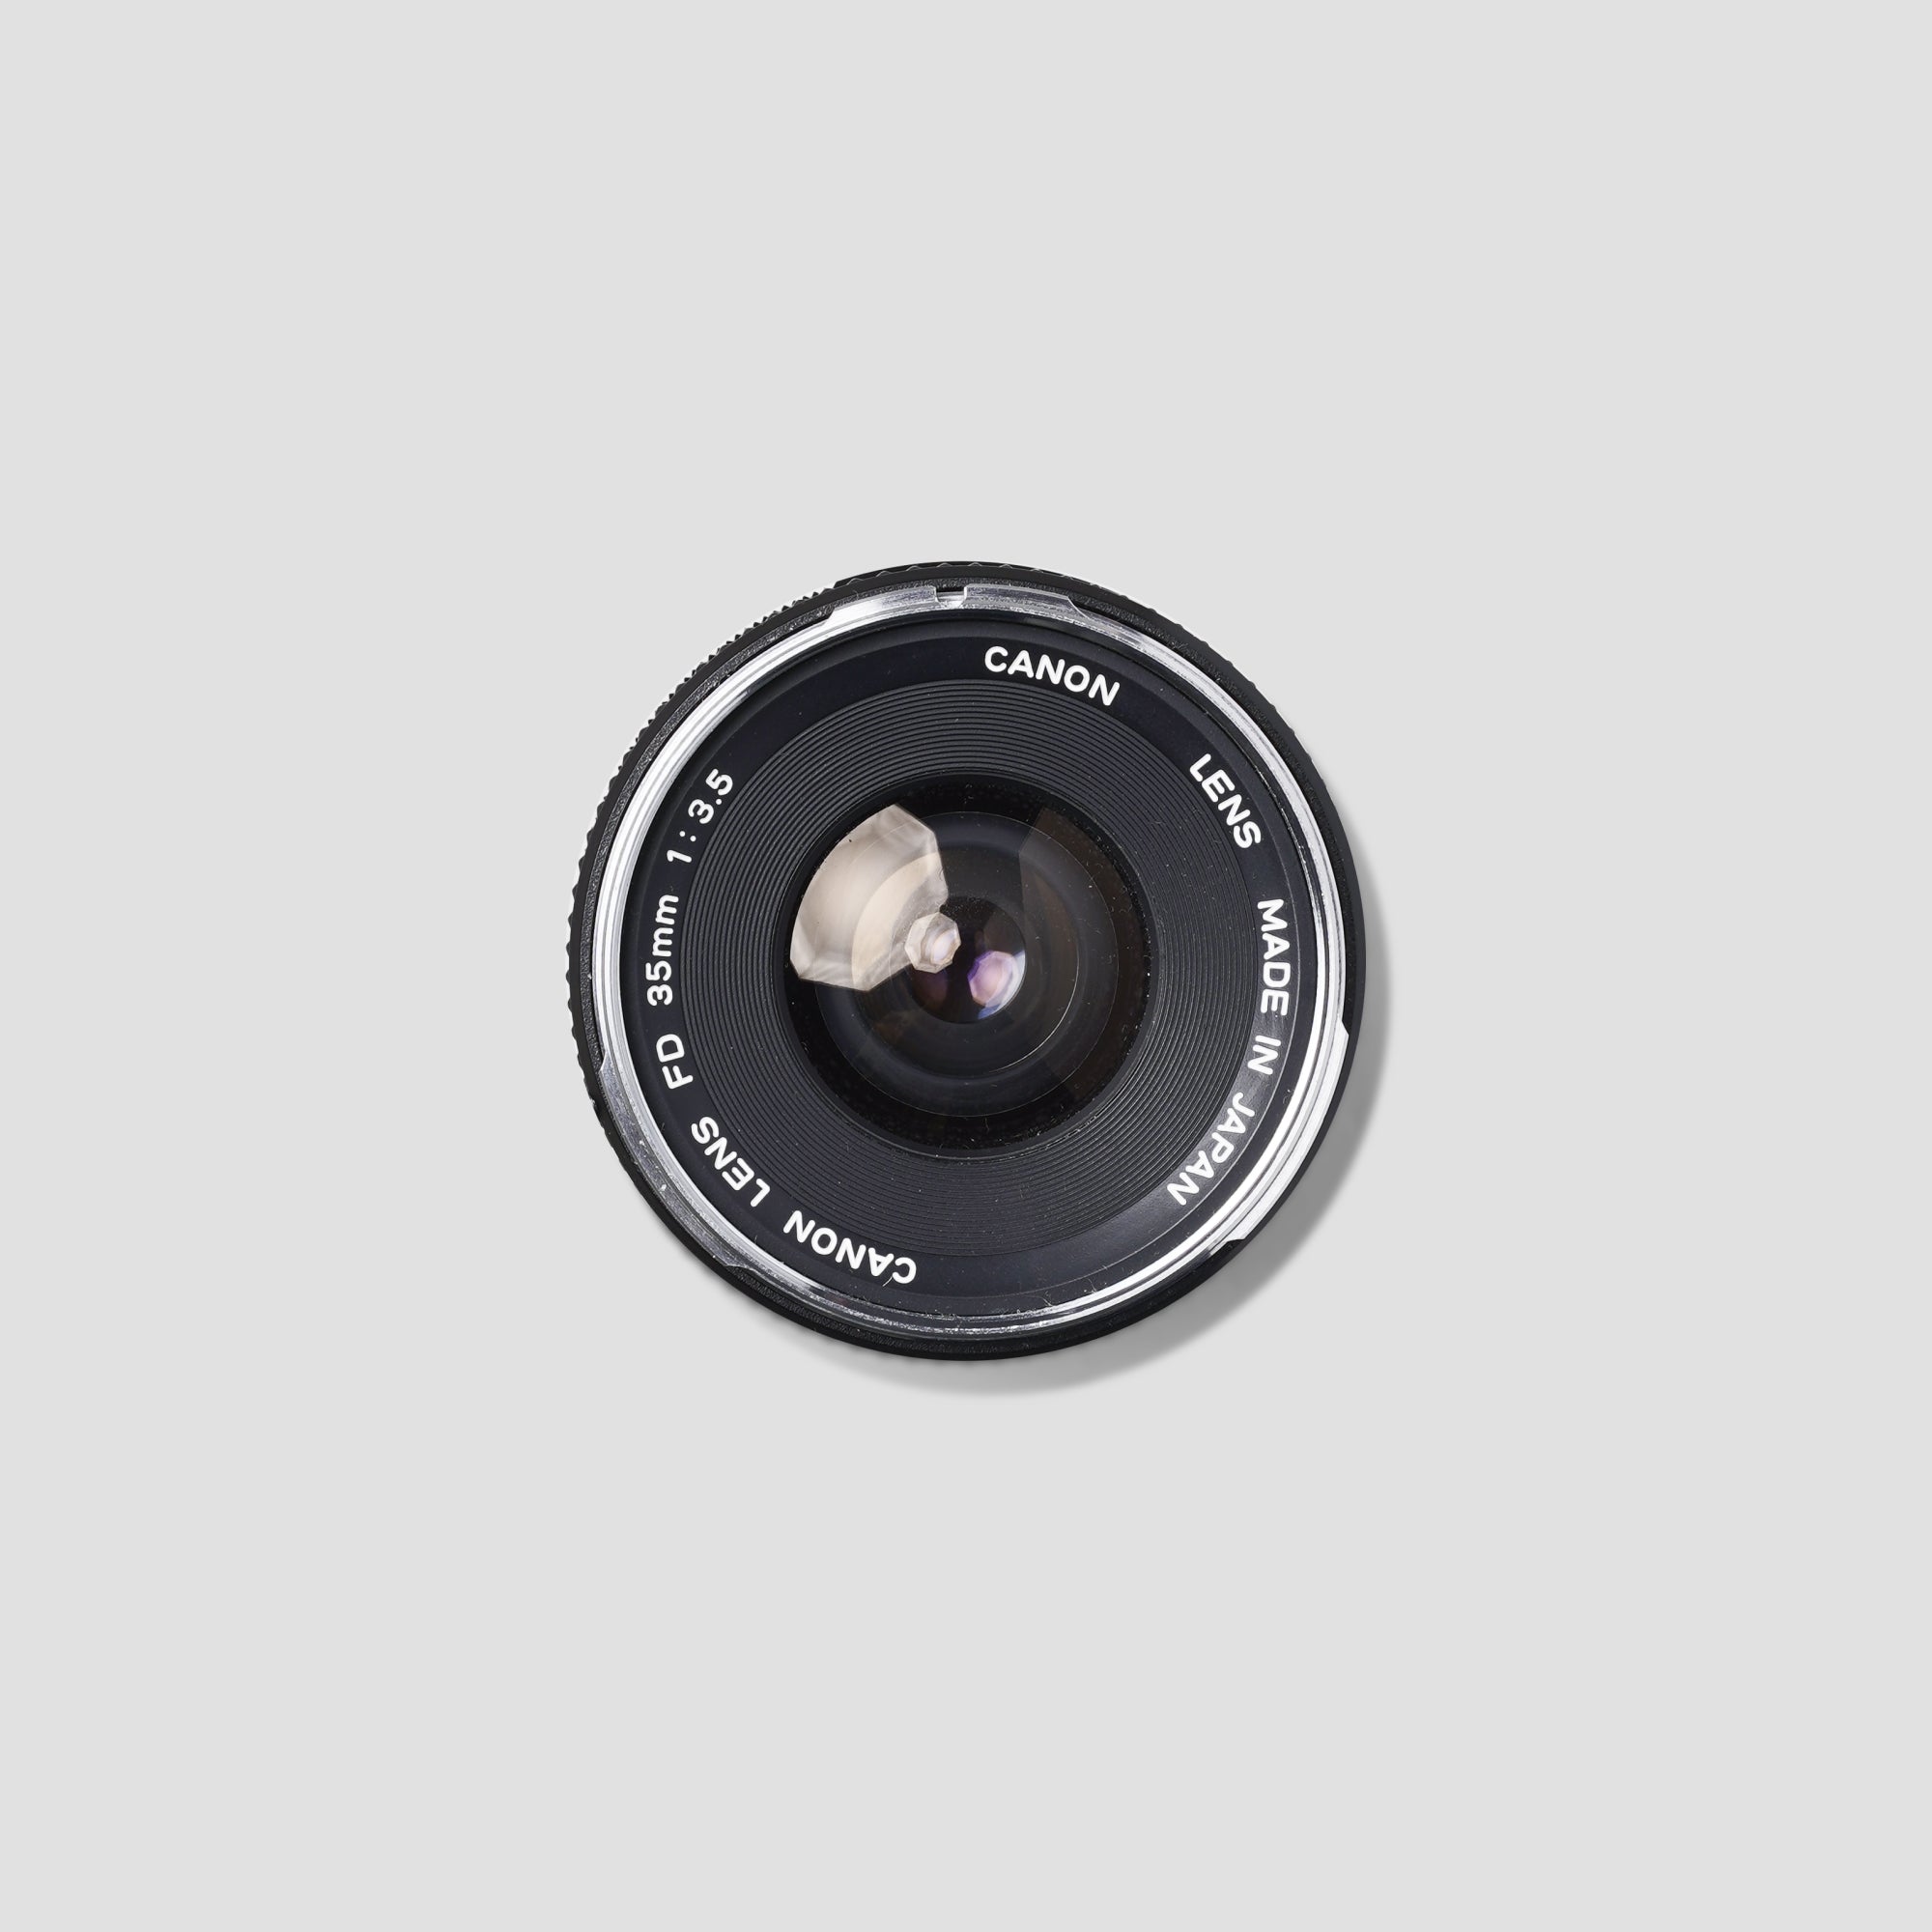 Buy Canon FD 35mm 3.5 (Chrome Nose) now at Analogue Amsterdam